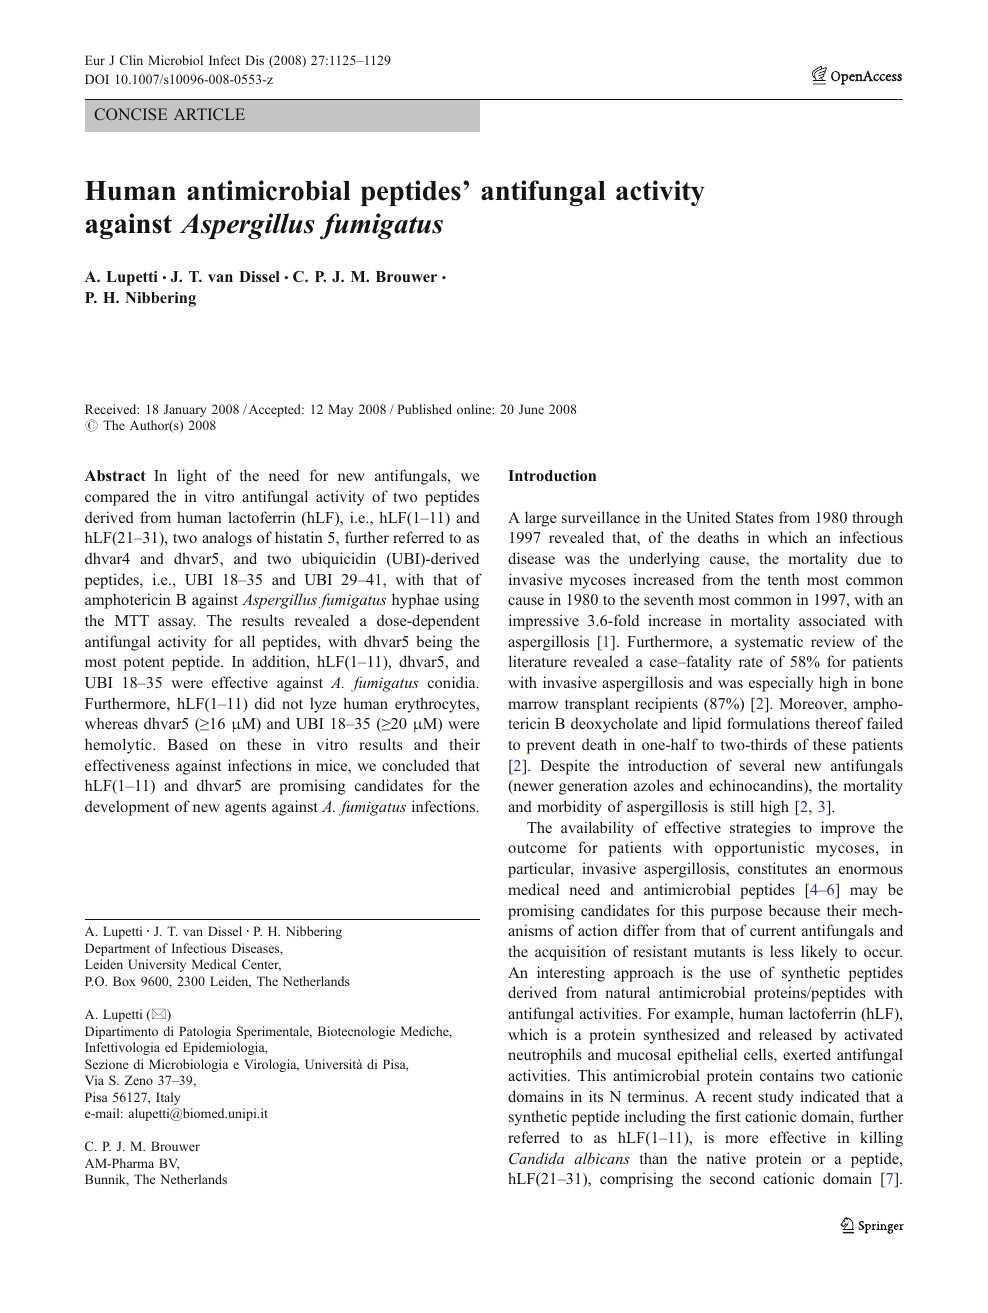 Human Antimicrobial Peptides Antifungal Activity Against Aspergillus Fumigatus Topic Of Research Paper In Biological Sciences Download Scholarly Article Pdf And Read For Free On Cyberleninka Open Science Hub